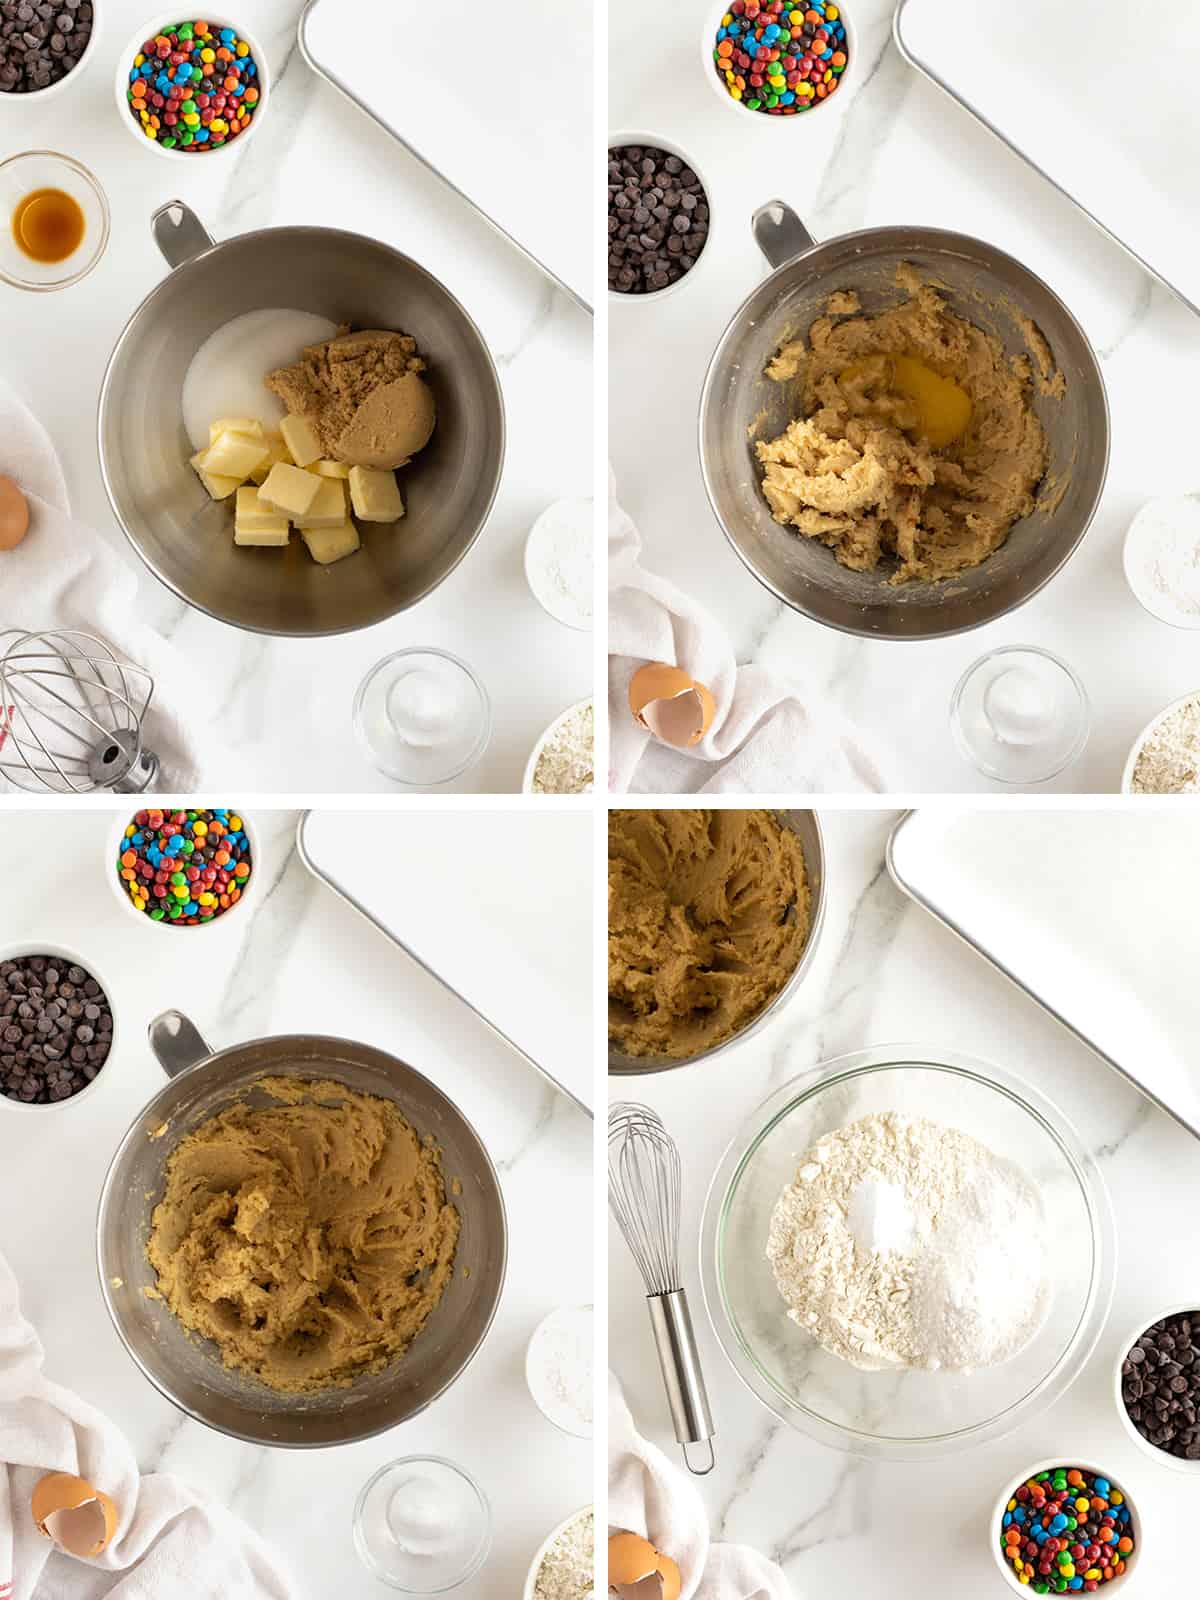 Steps to make cookie dough for M&M chocolate chip pudding cookies.